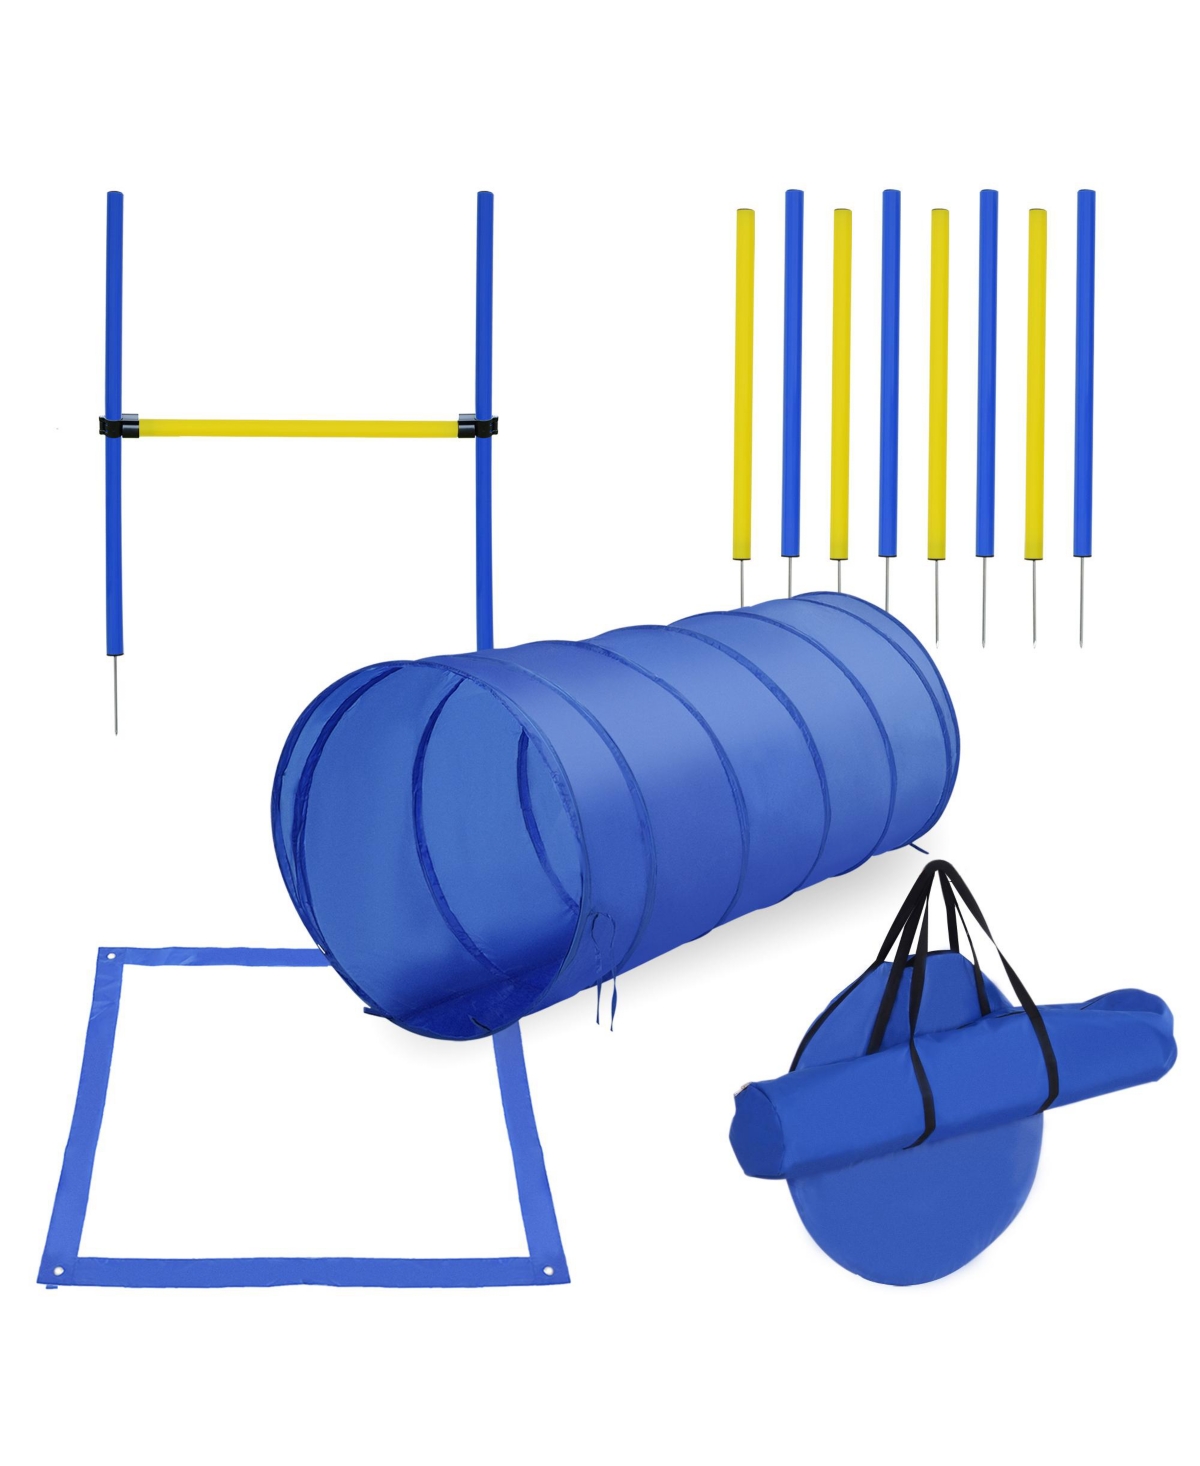 Backyard Dog Agility Training Kit Obstacle Course Equipment Tunnel - Blue